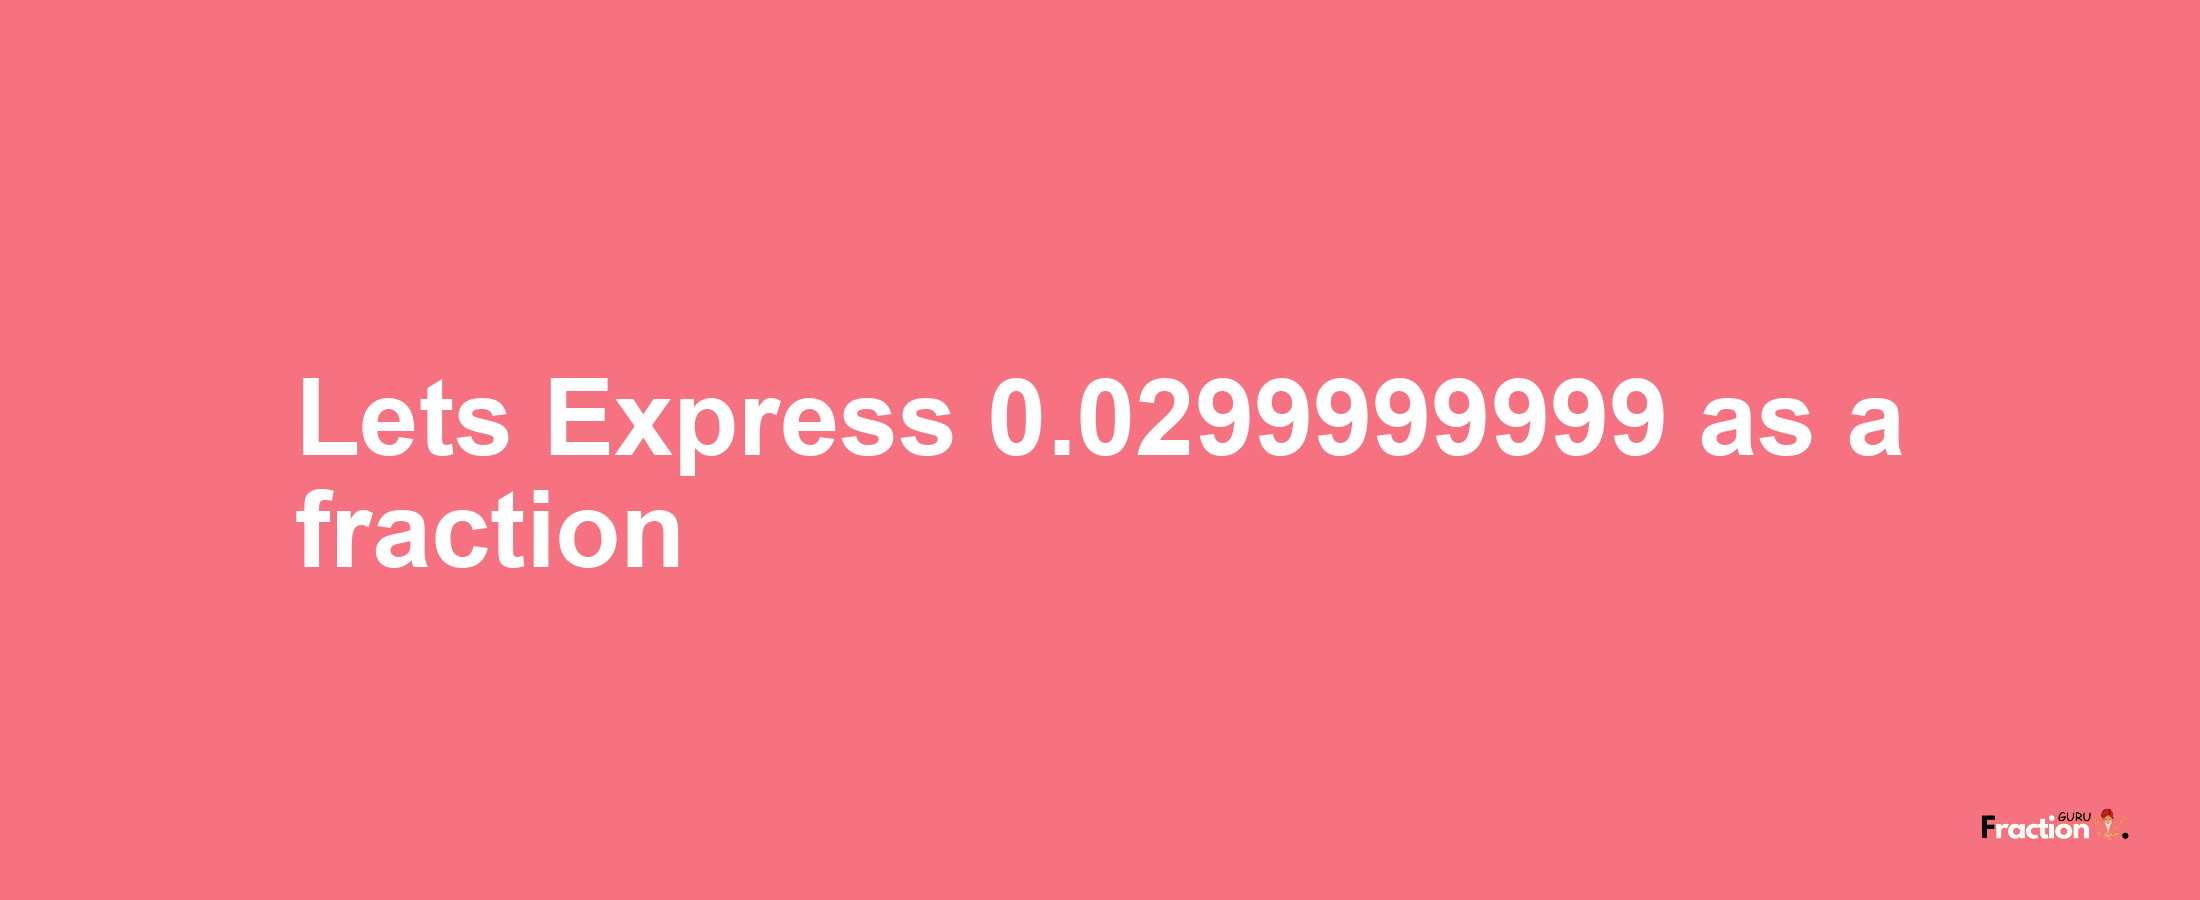 Lets Express 0.0299999999 as afraction